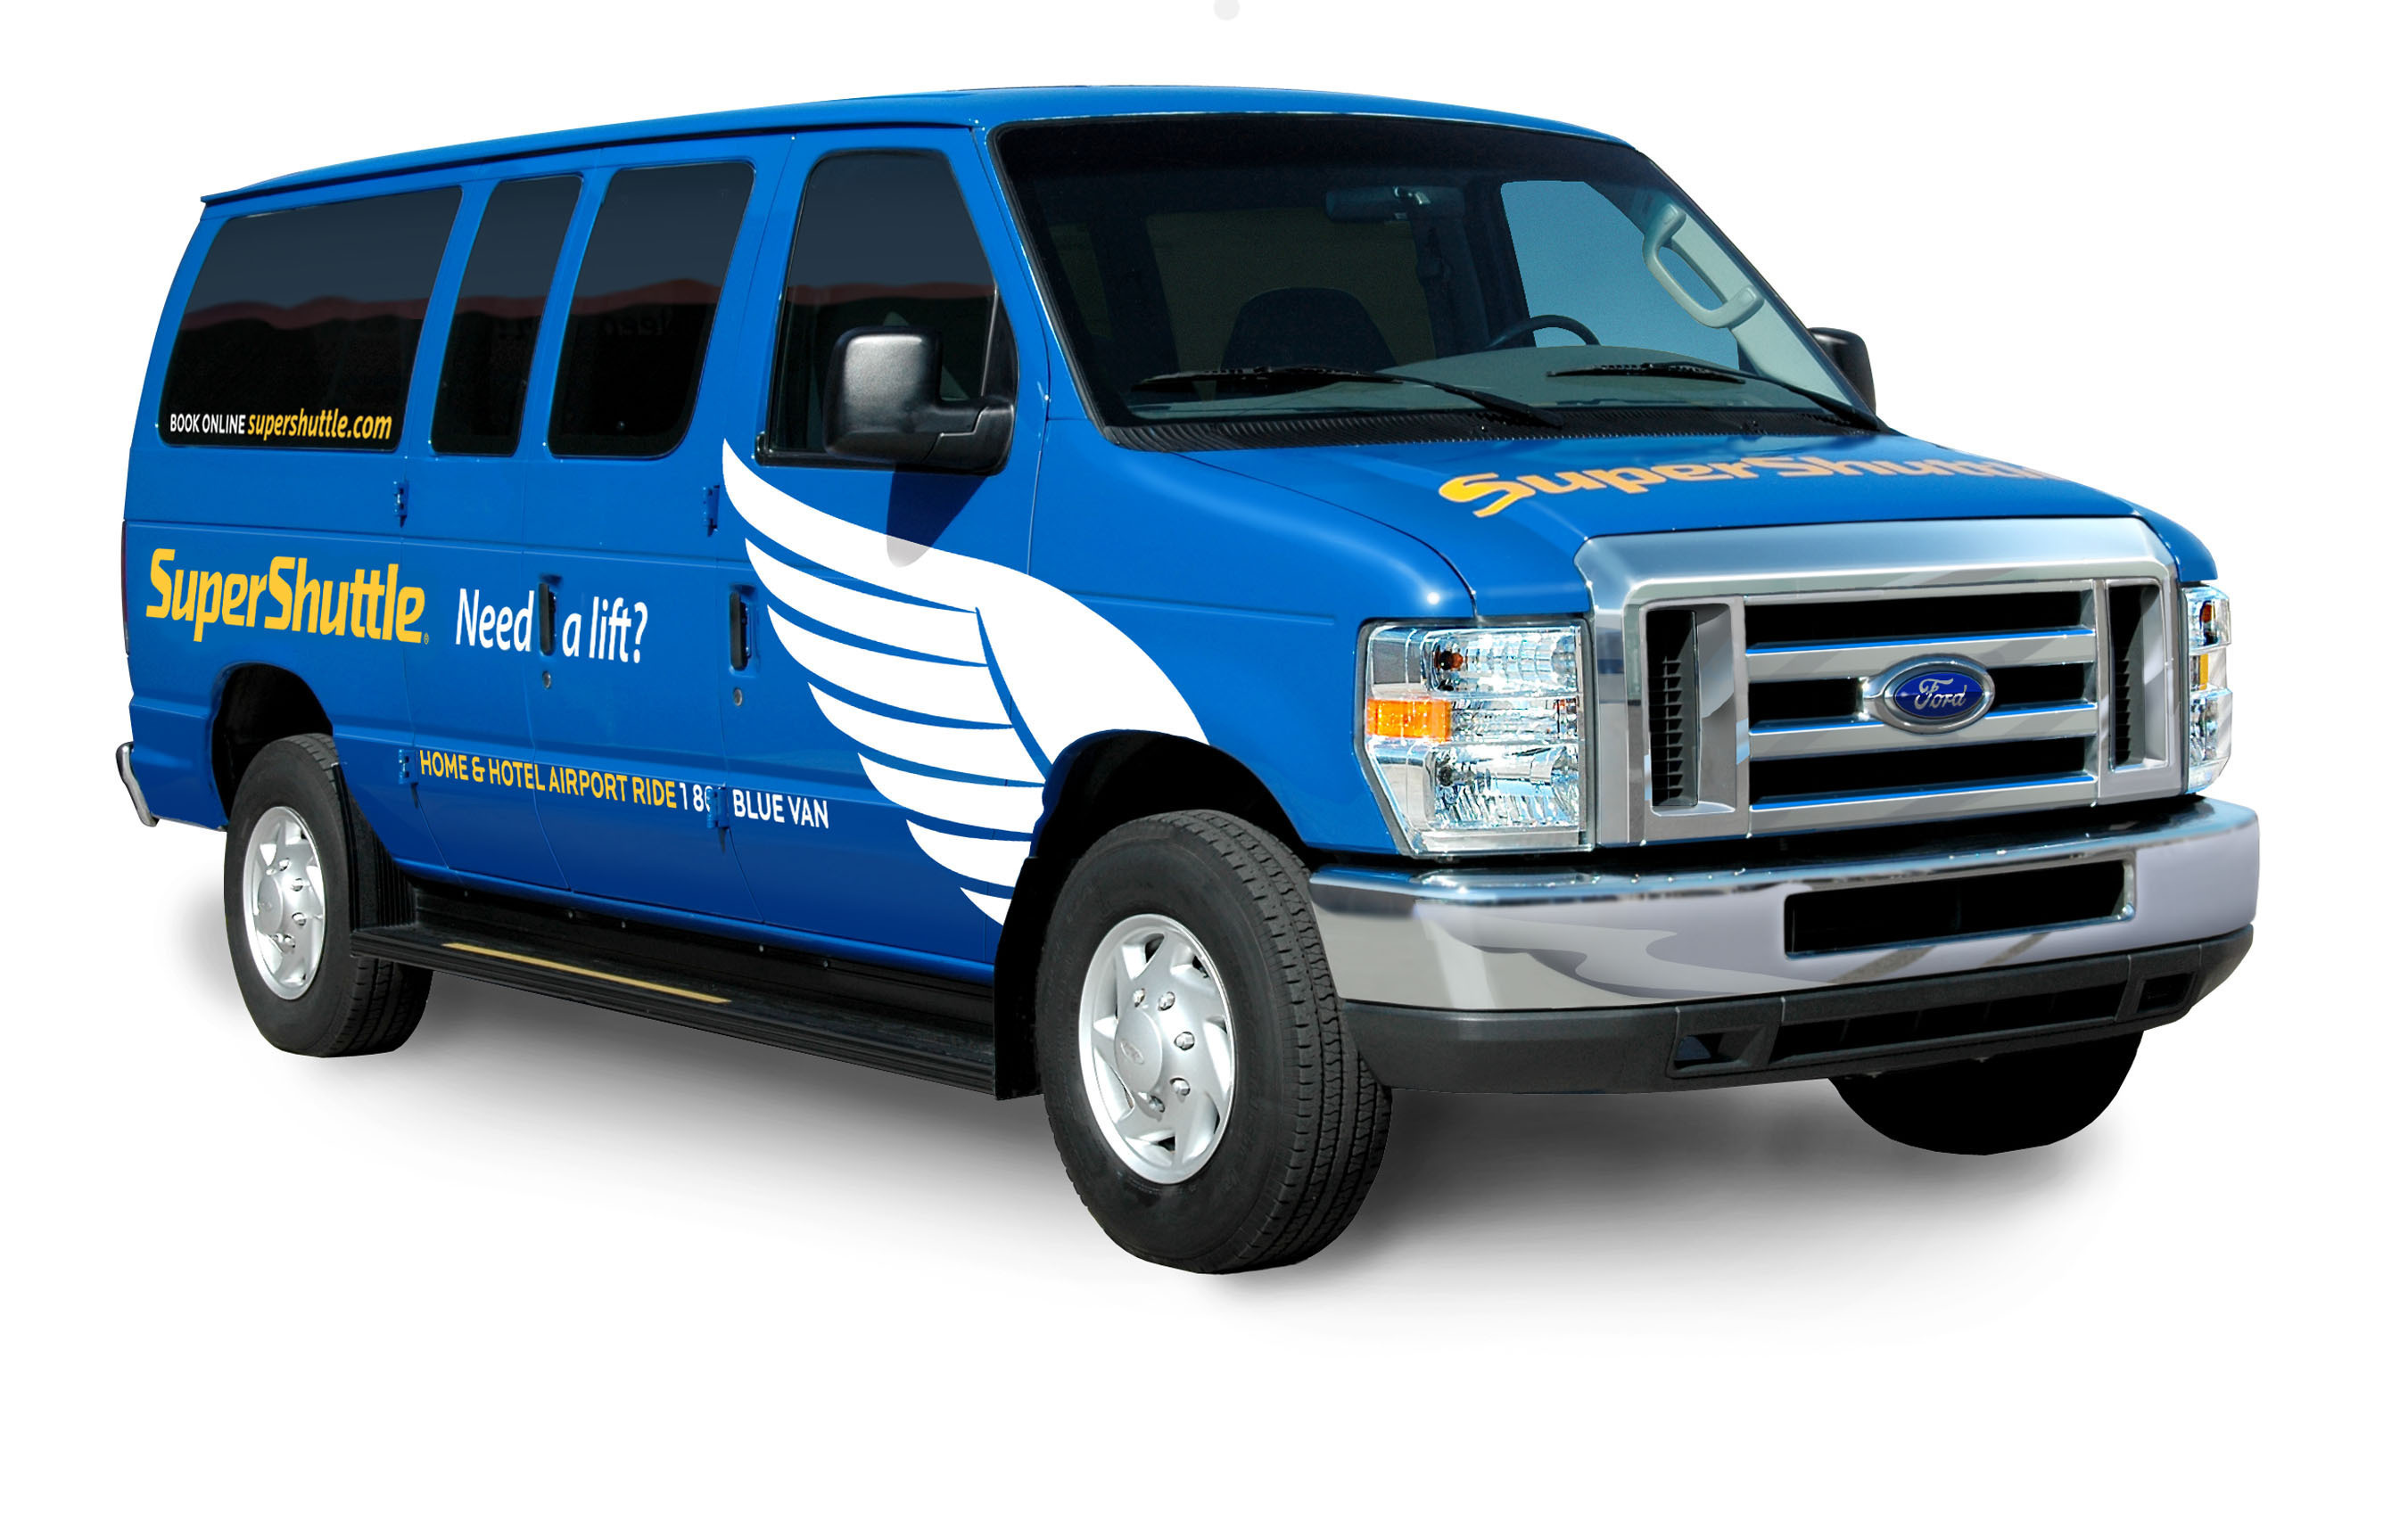 SuperShuttle, the most environmentally friendly way to get to the airport.